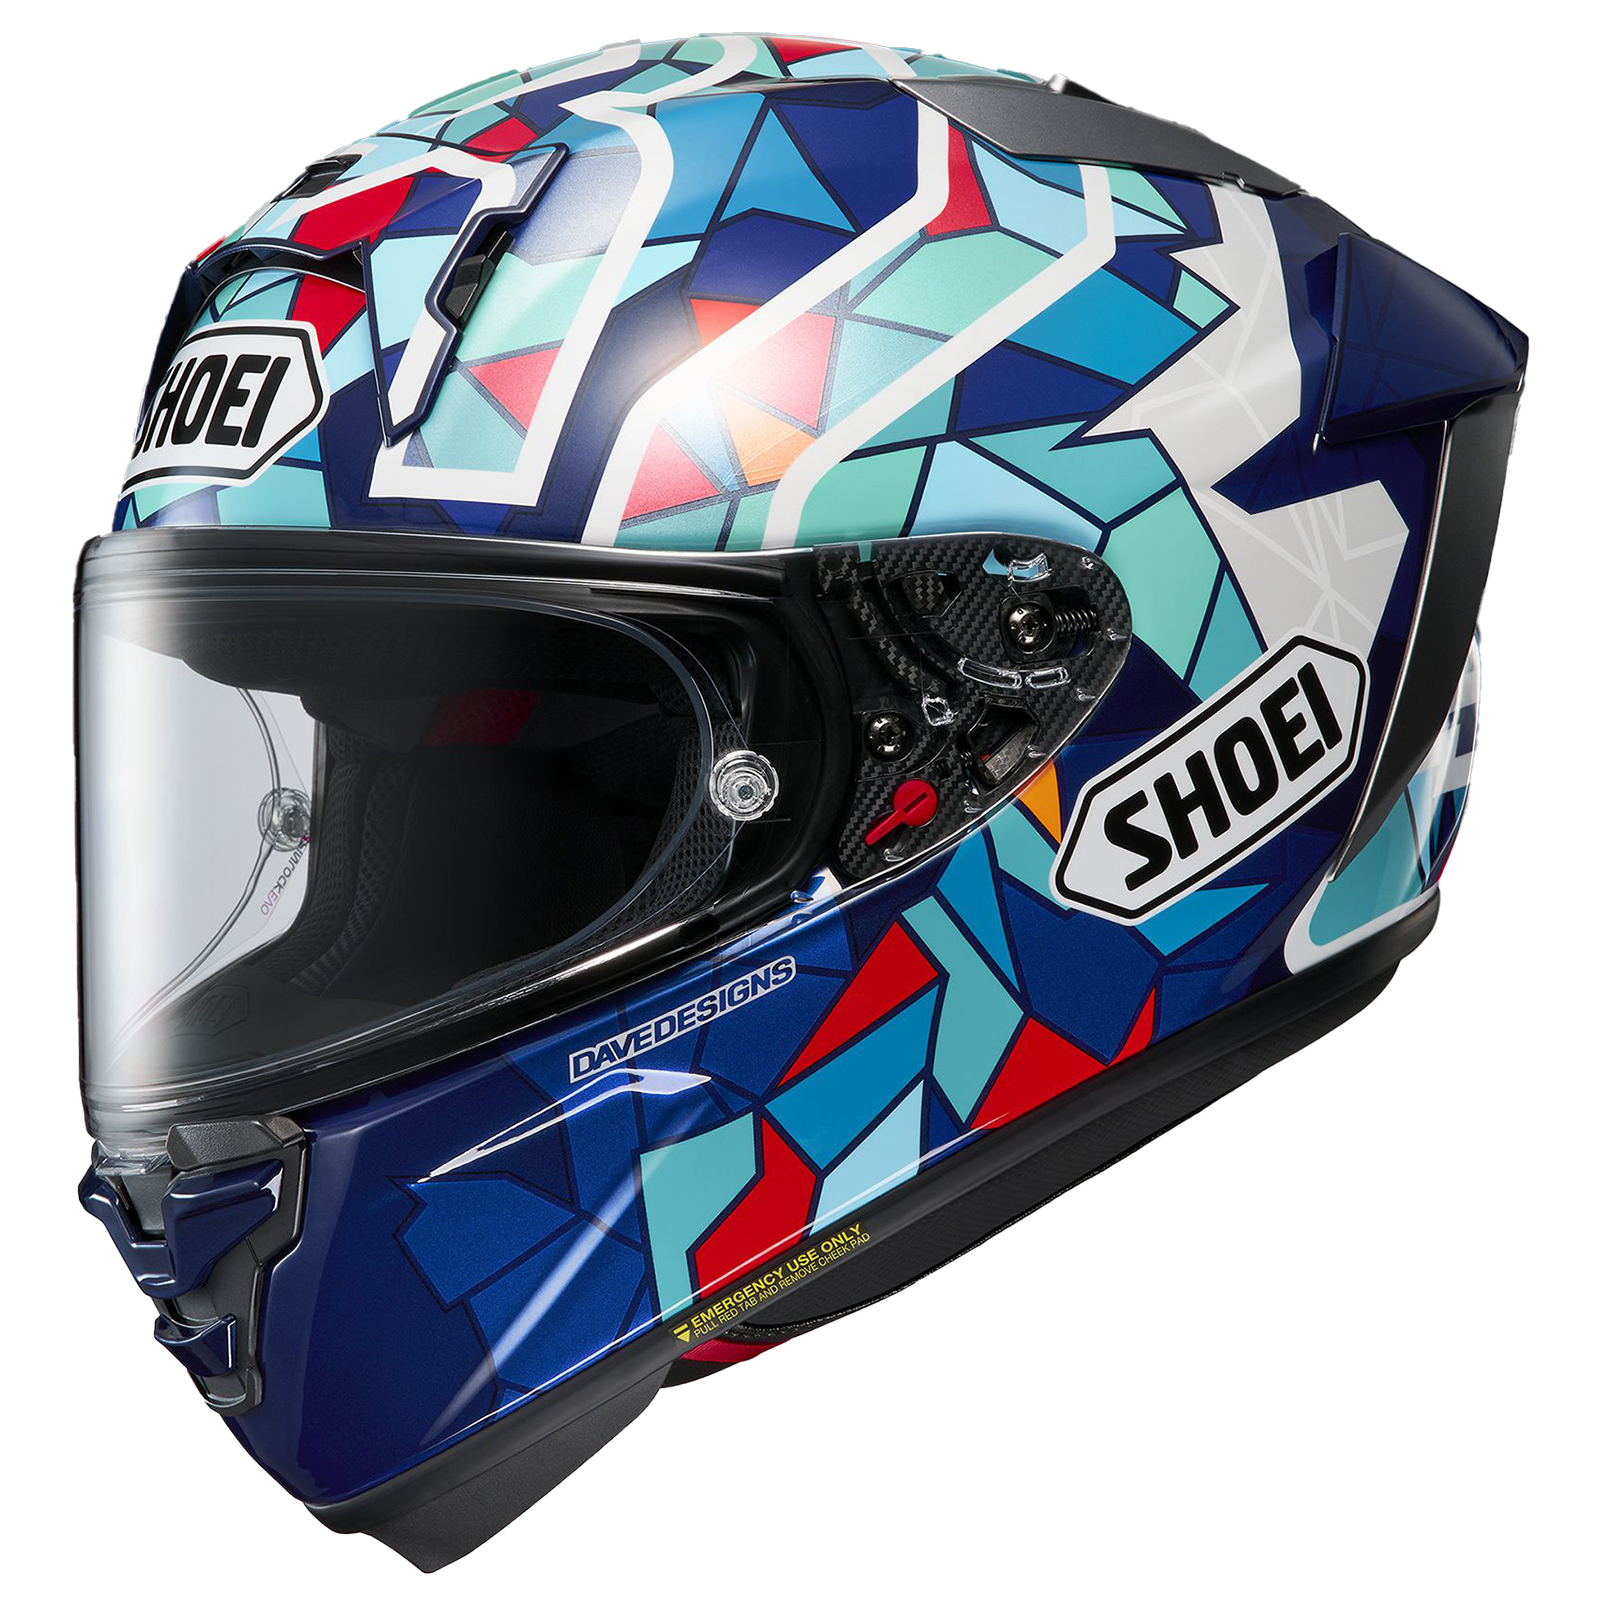 Shoei X-15, example shown is Barcelona graphic with Red, White and Blue stained-glass pattern